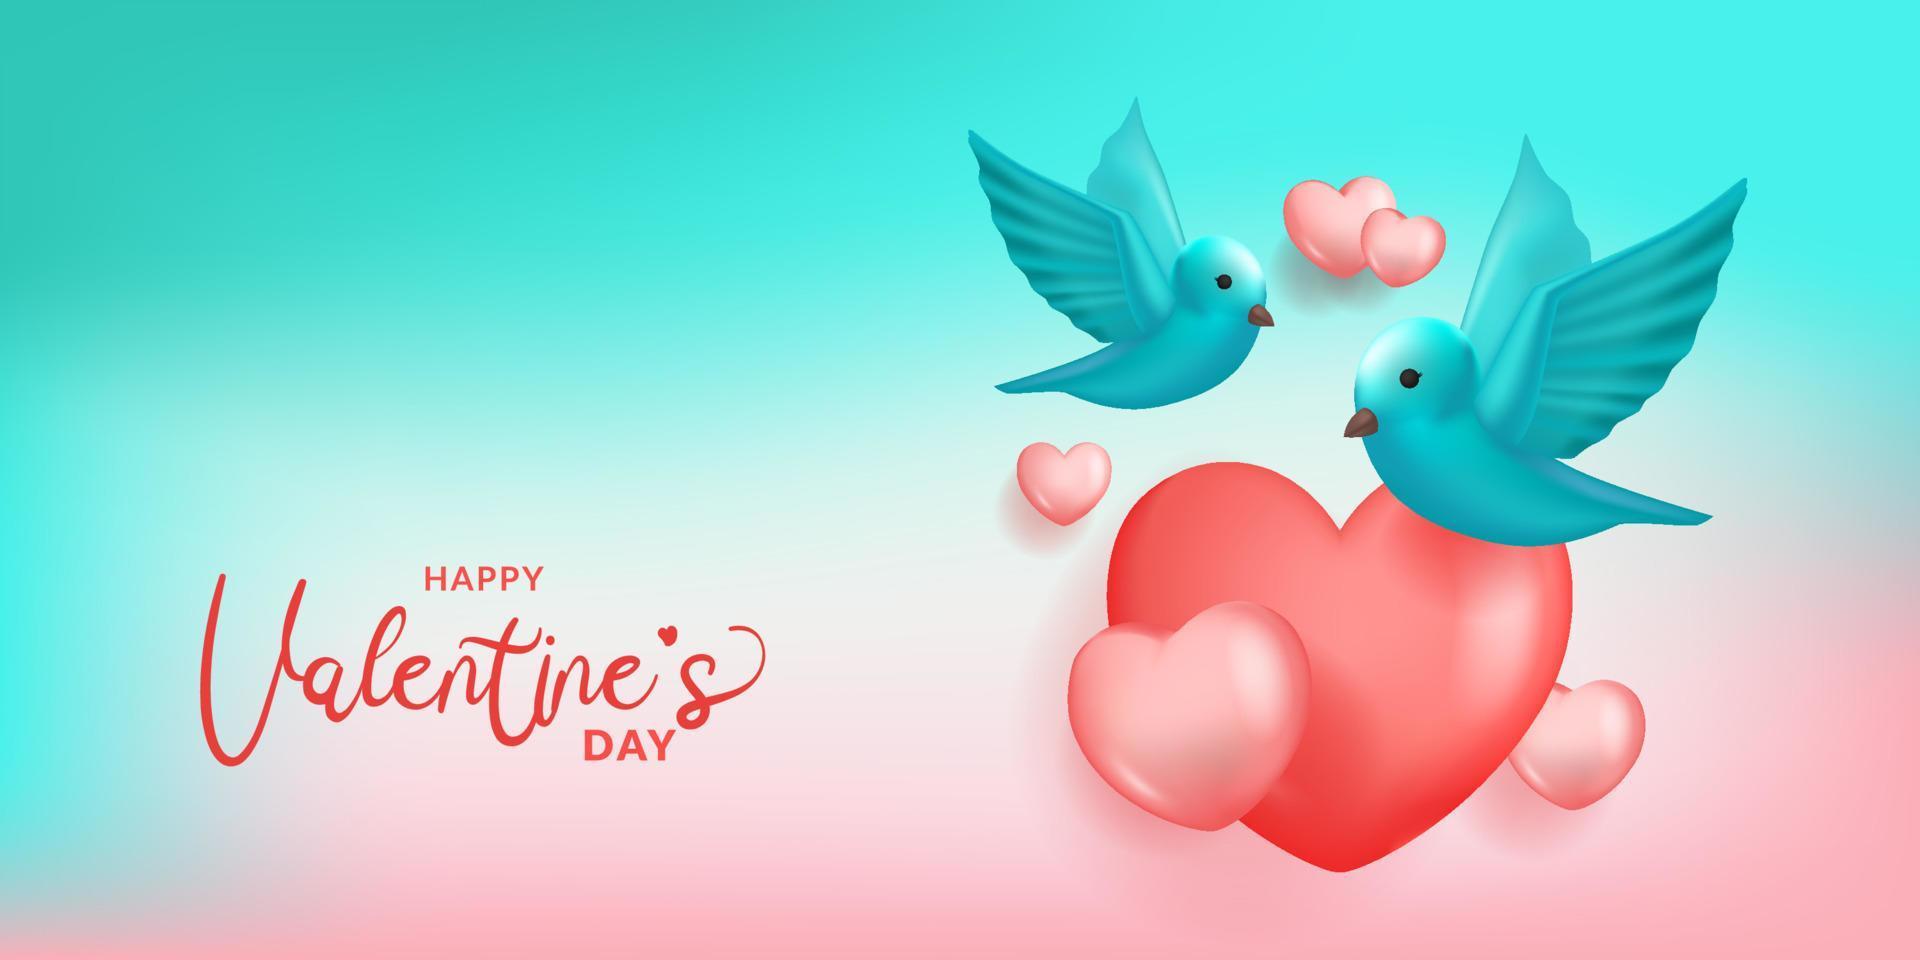 bird flying with heart shape valentine's day decoration sweet sky background vector